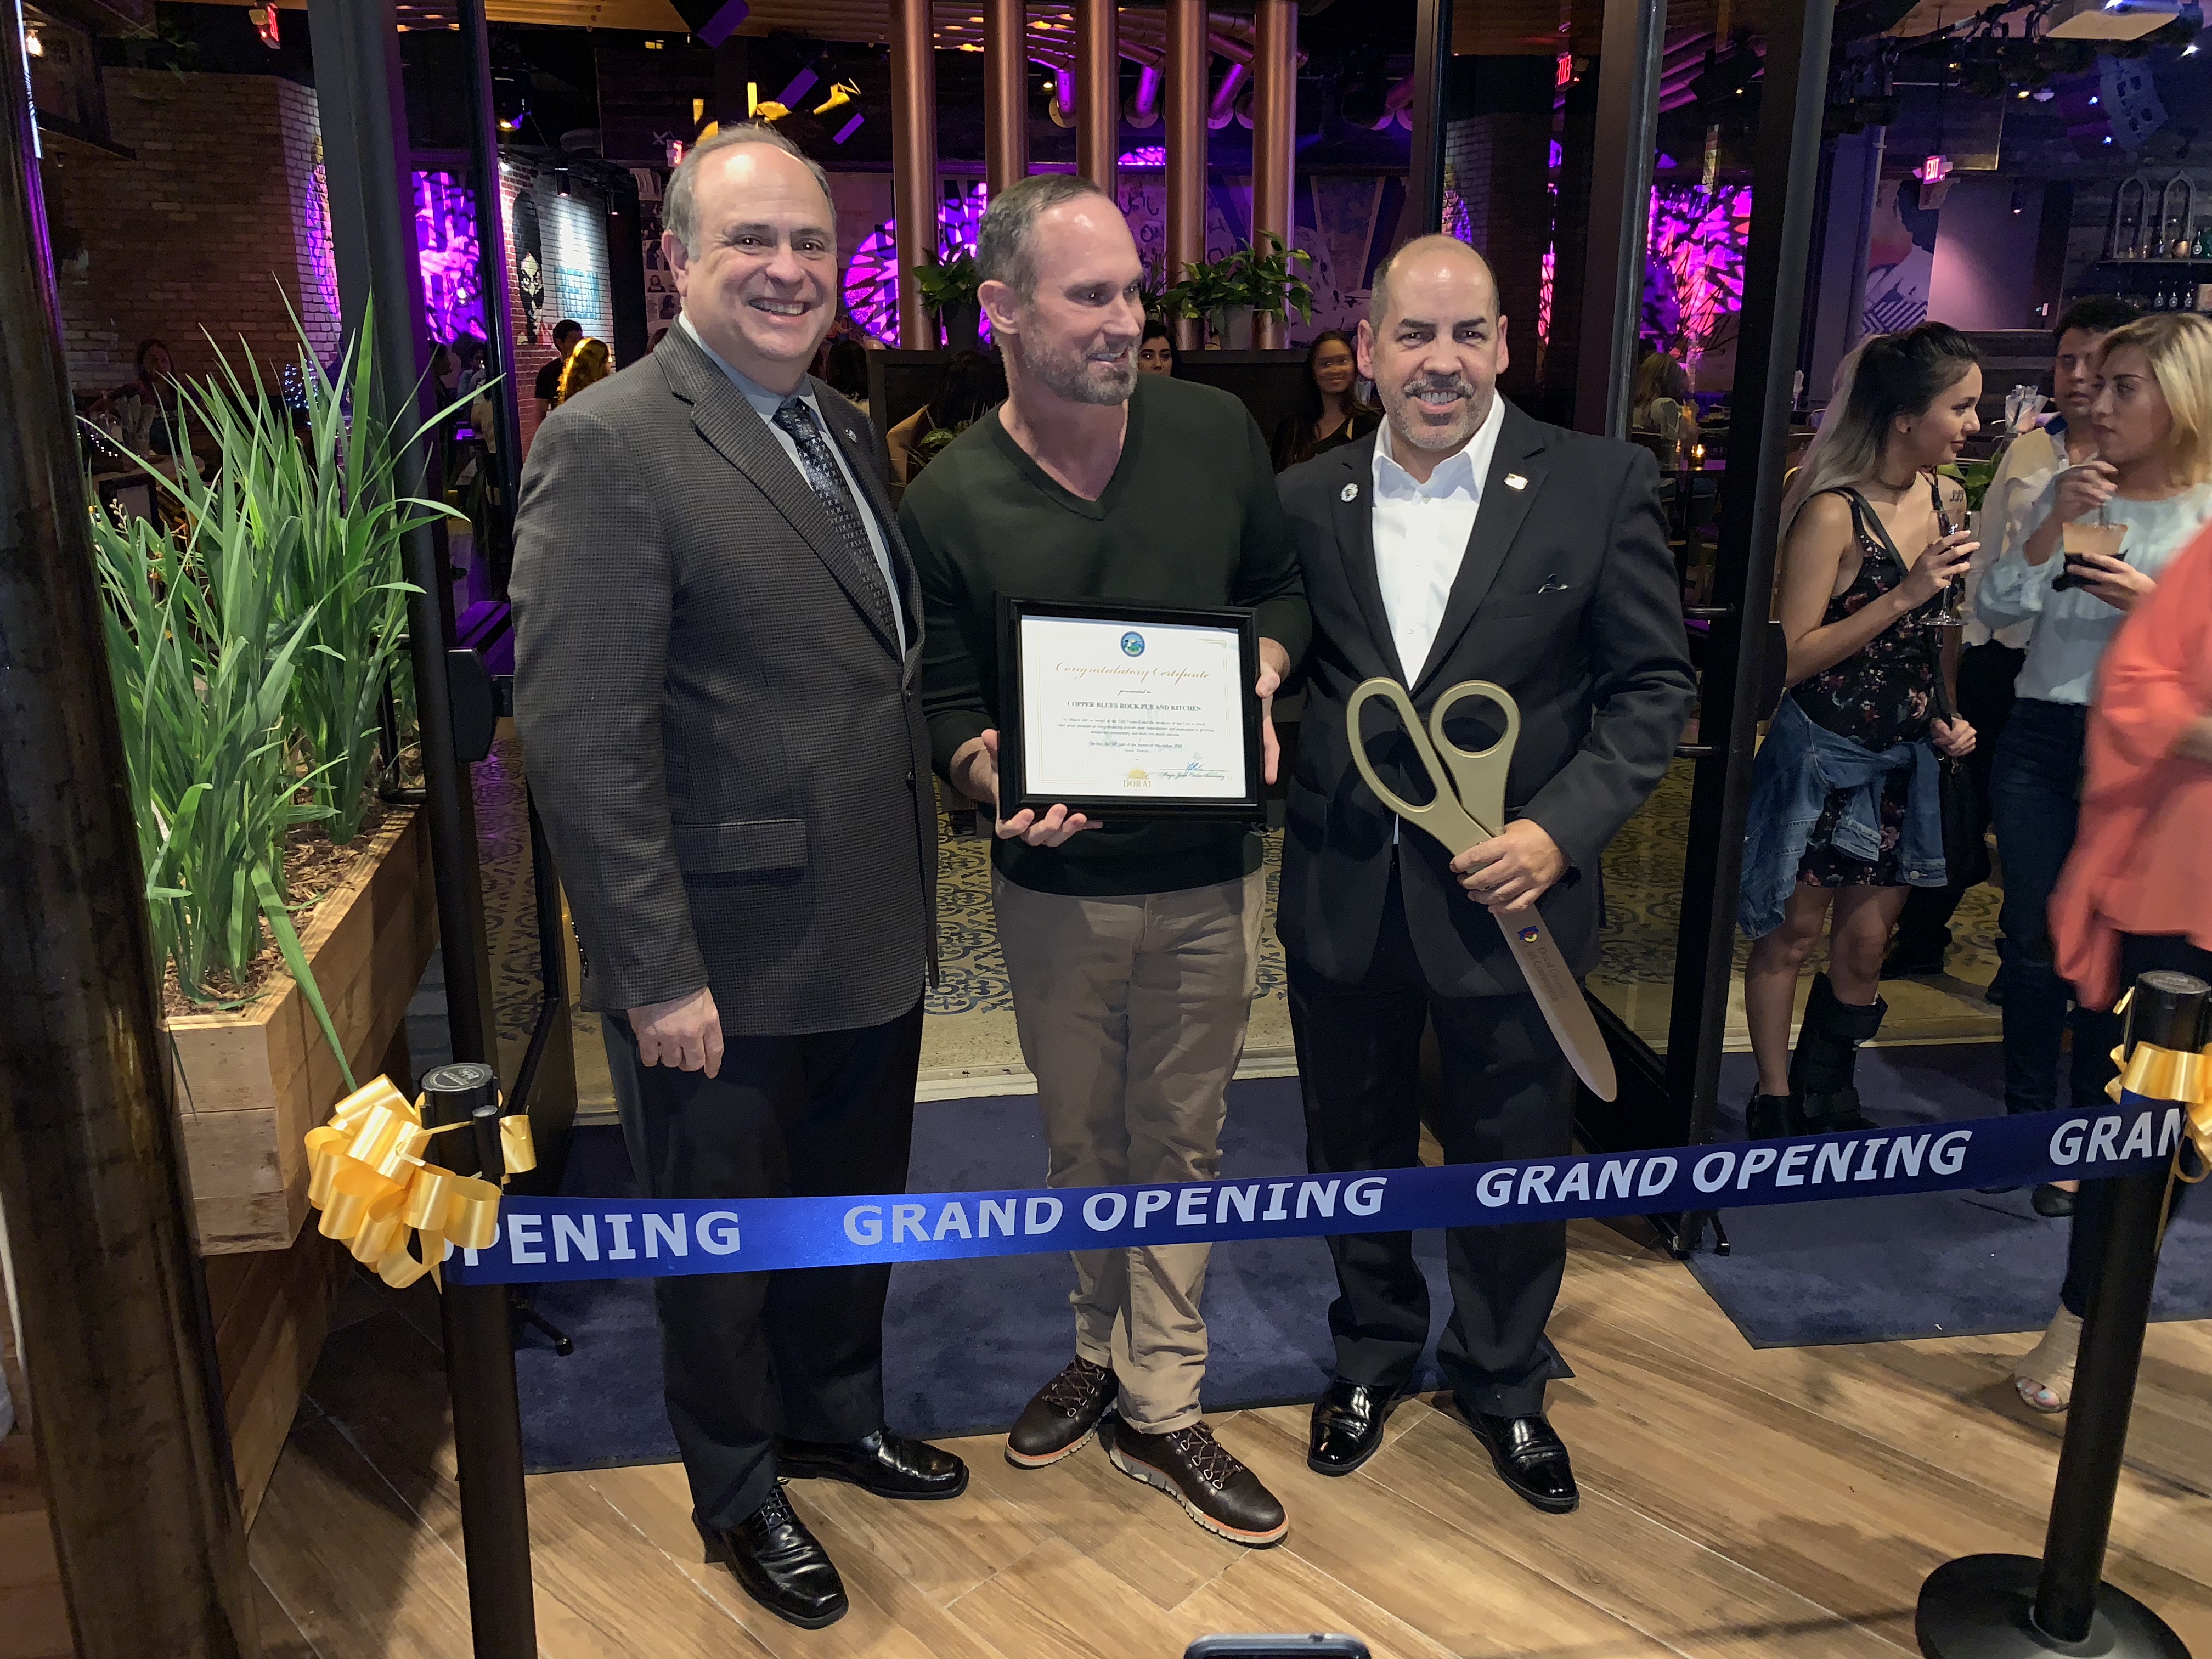 Ribbon cutting in Copper Blues Improv hosted by the Doral Chamber of Commerce.